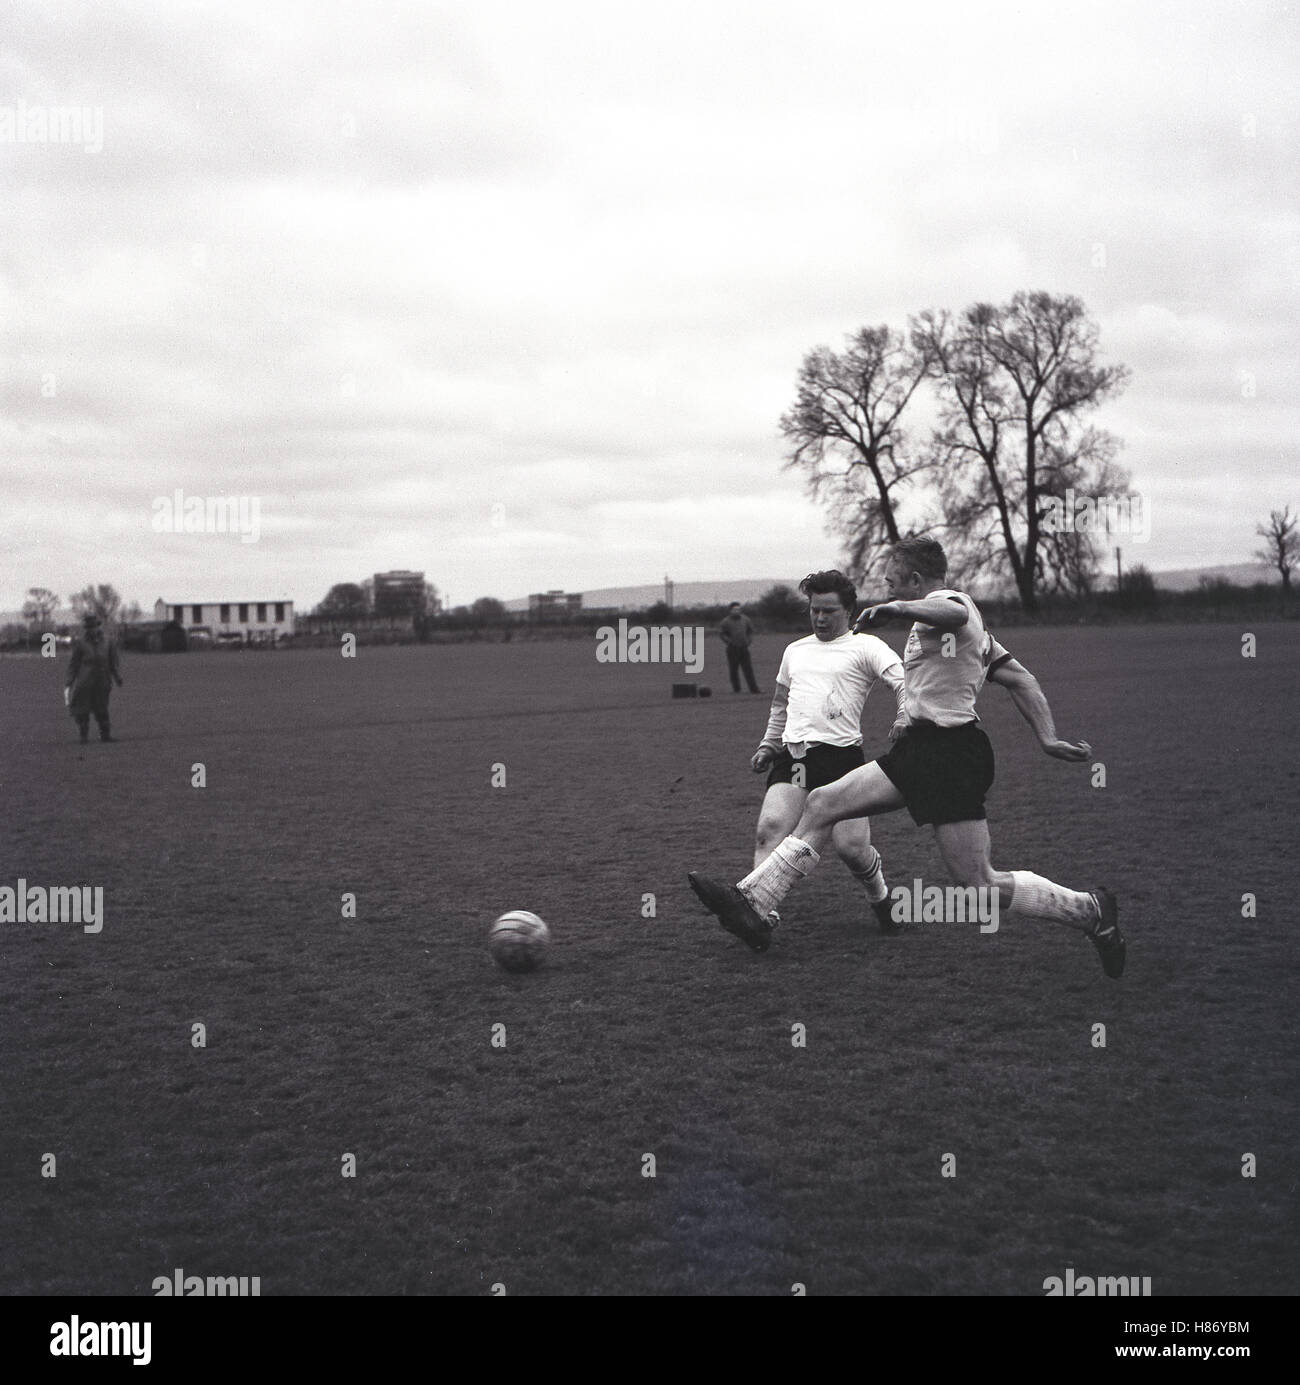 1965, historical, amateur football match, two male players competing for the ball, Bucks, England. Stock Photo